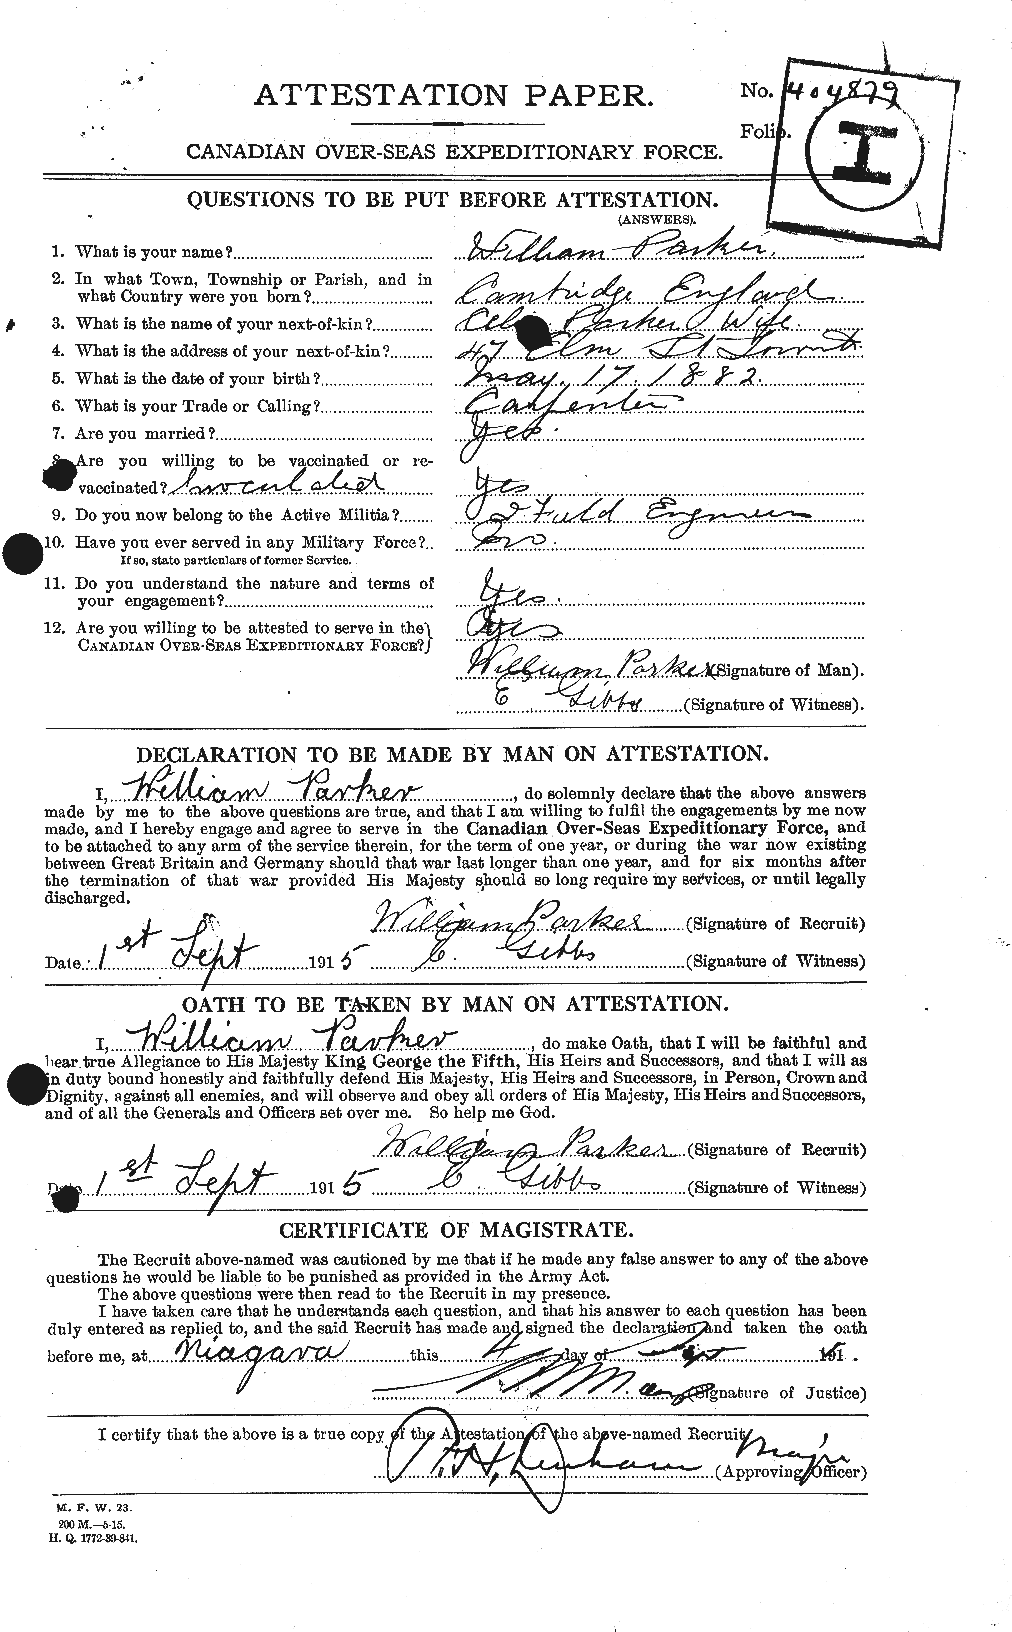 Personnel Records of the First World War - CEF 565720a